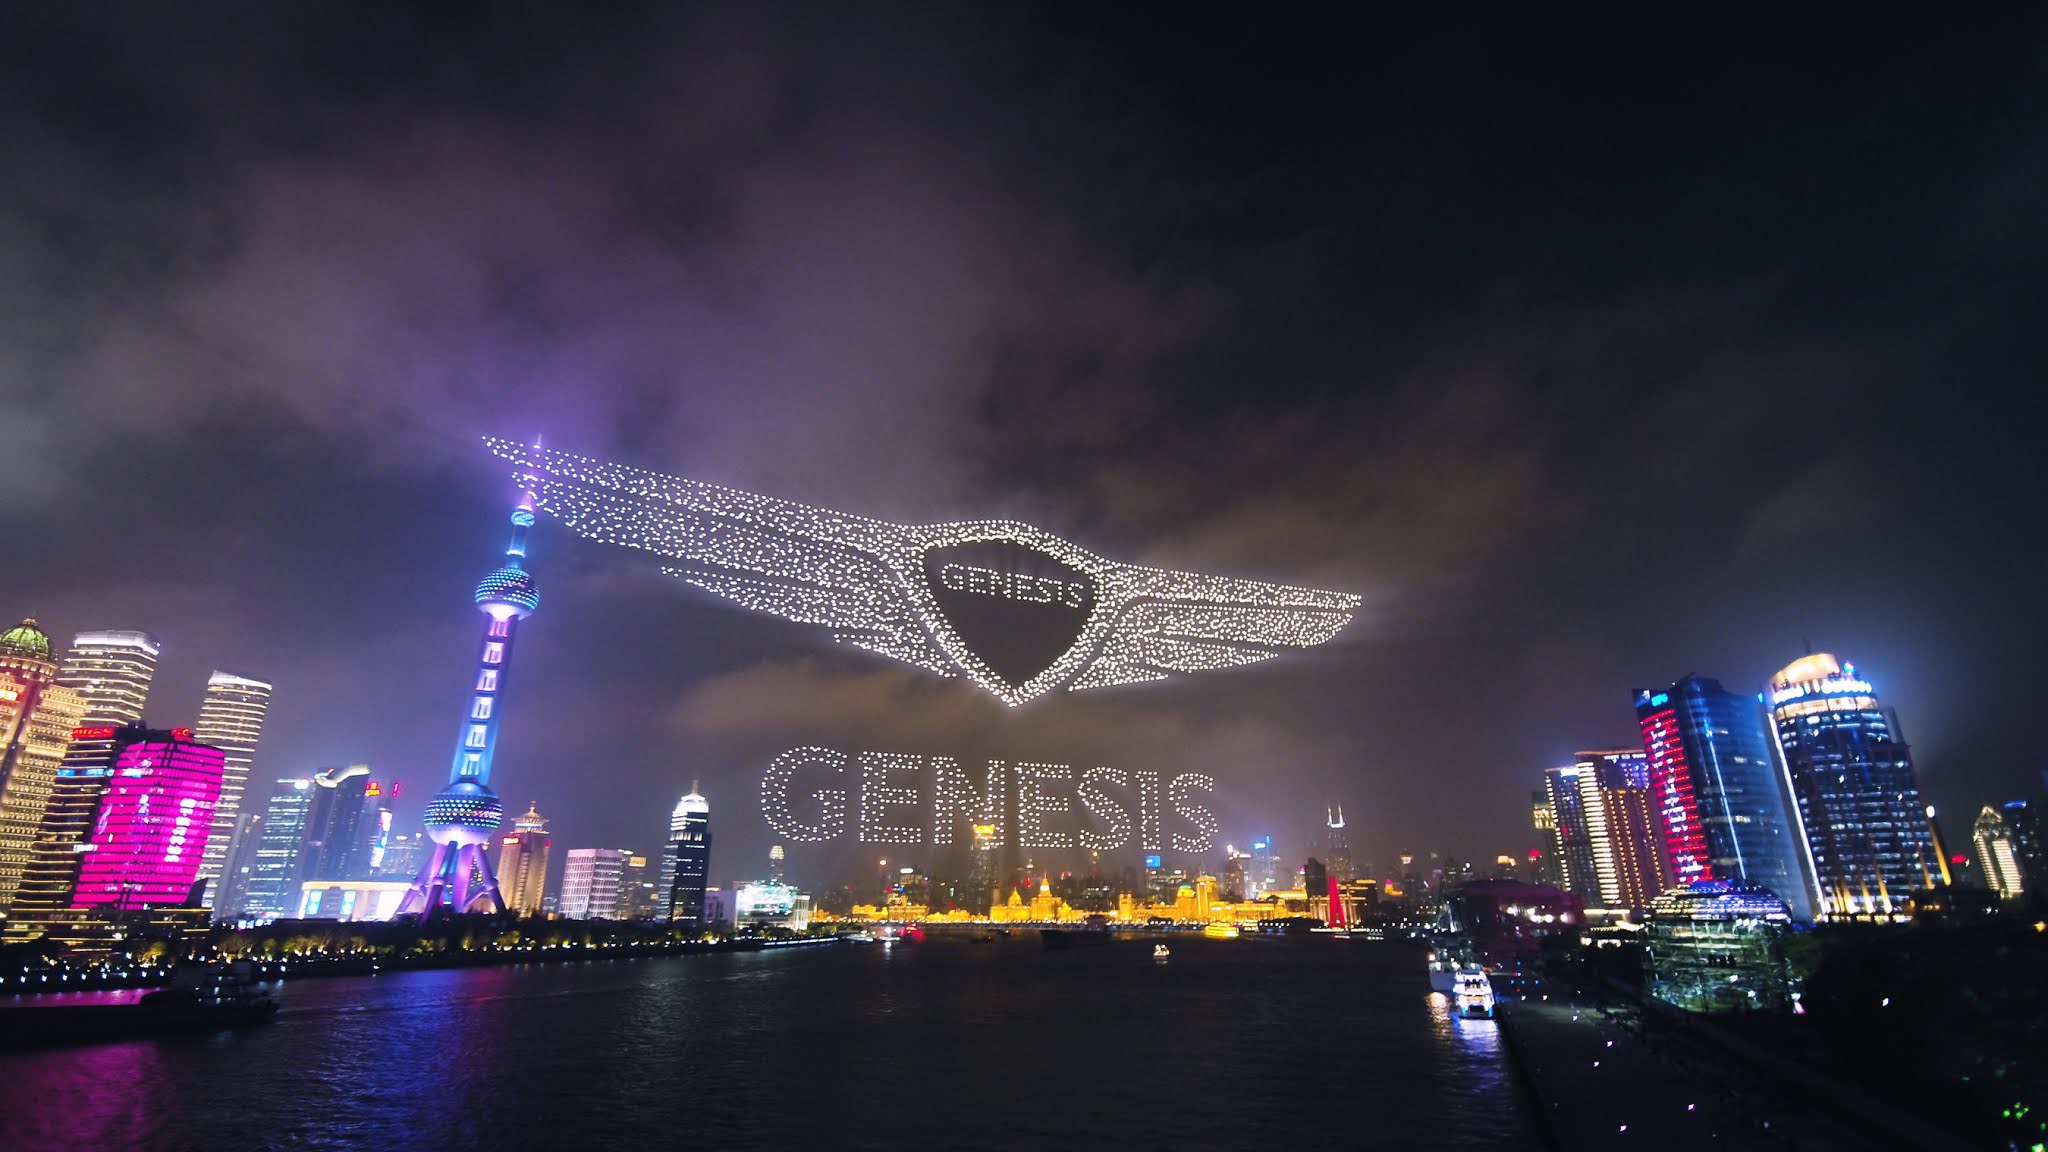 Genesis enters Chinese market with stunning drone show